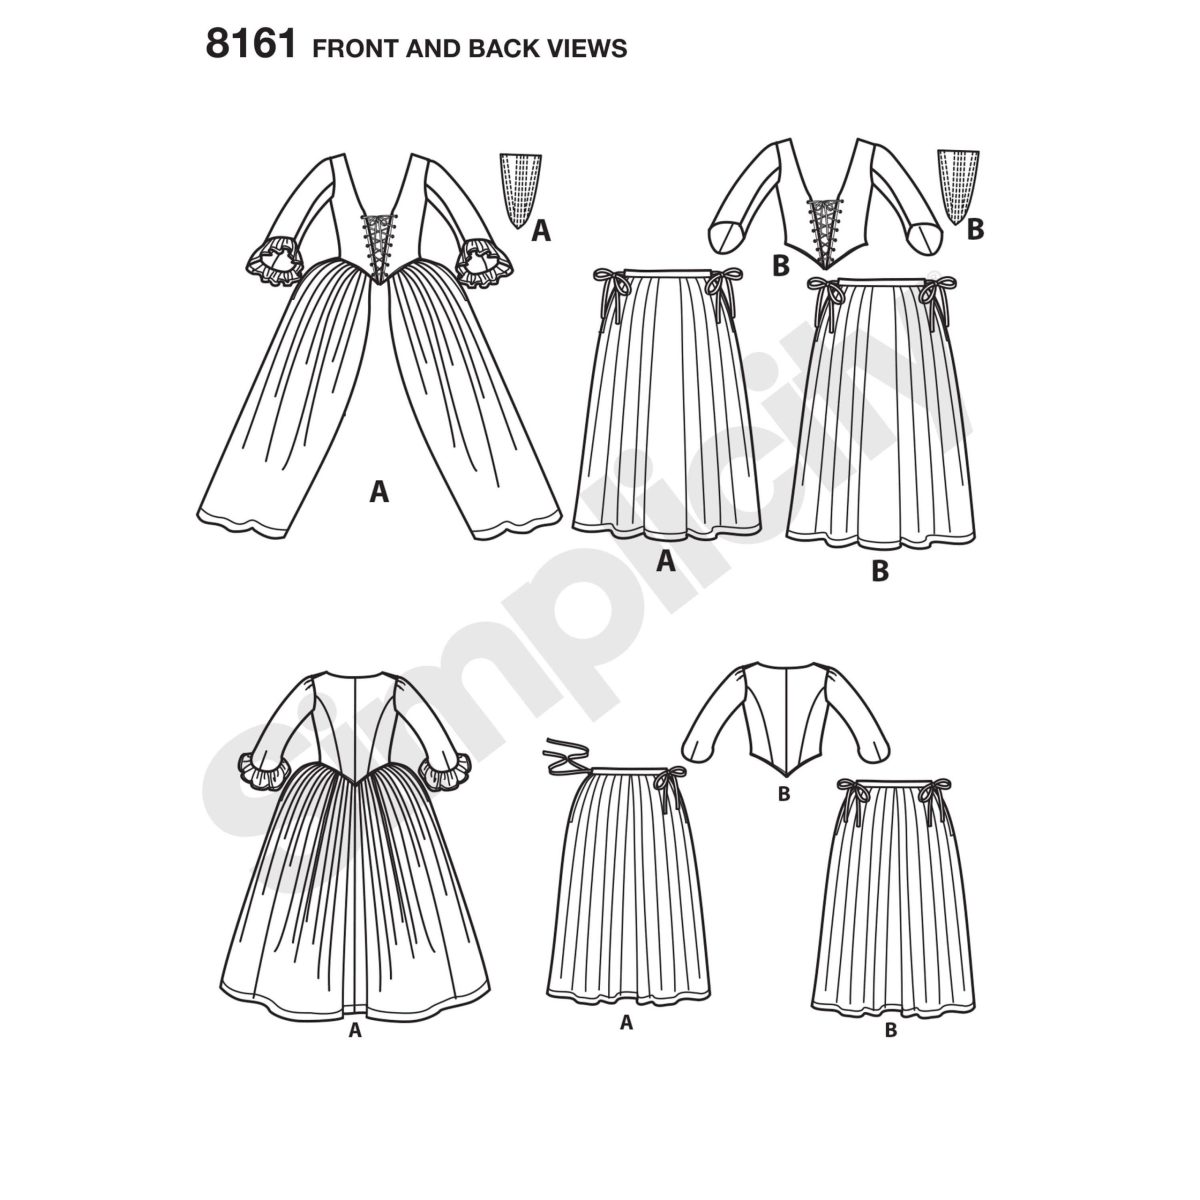 Simplicity Pattern 8161 Misses' 18th Century Costumes